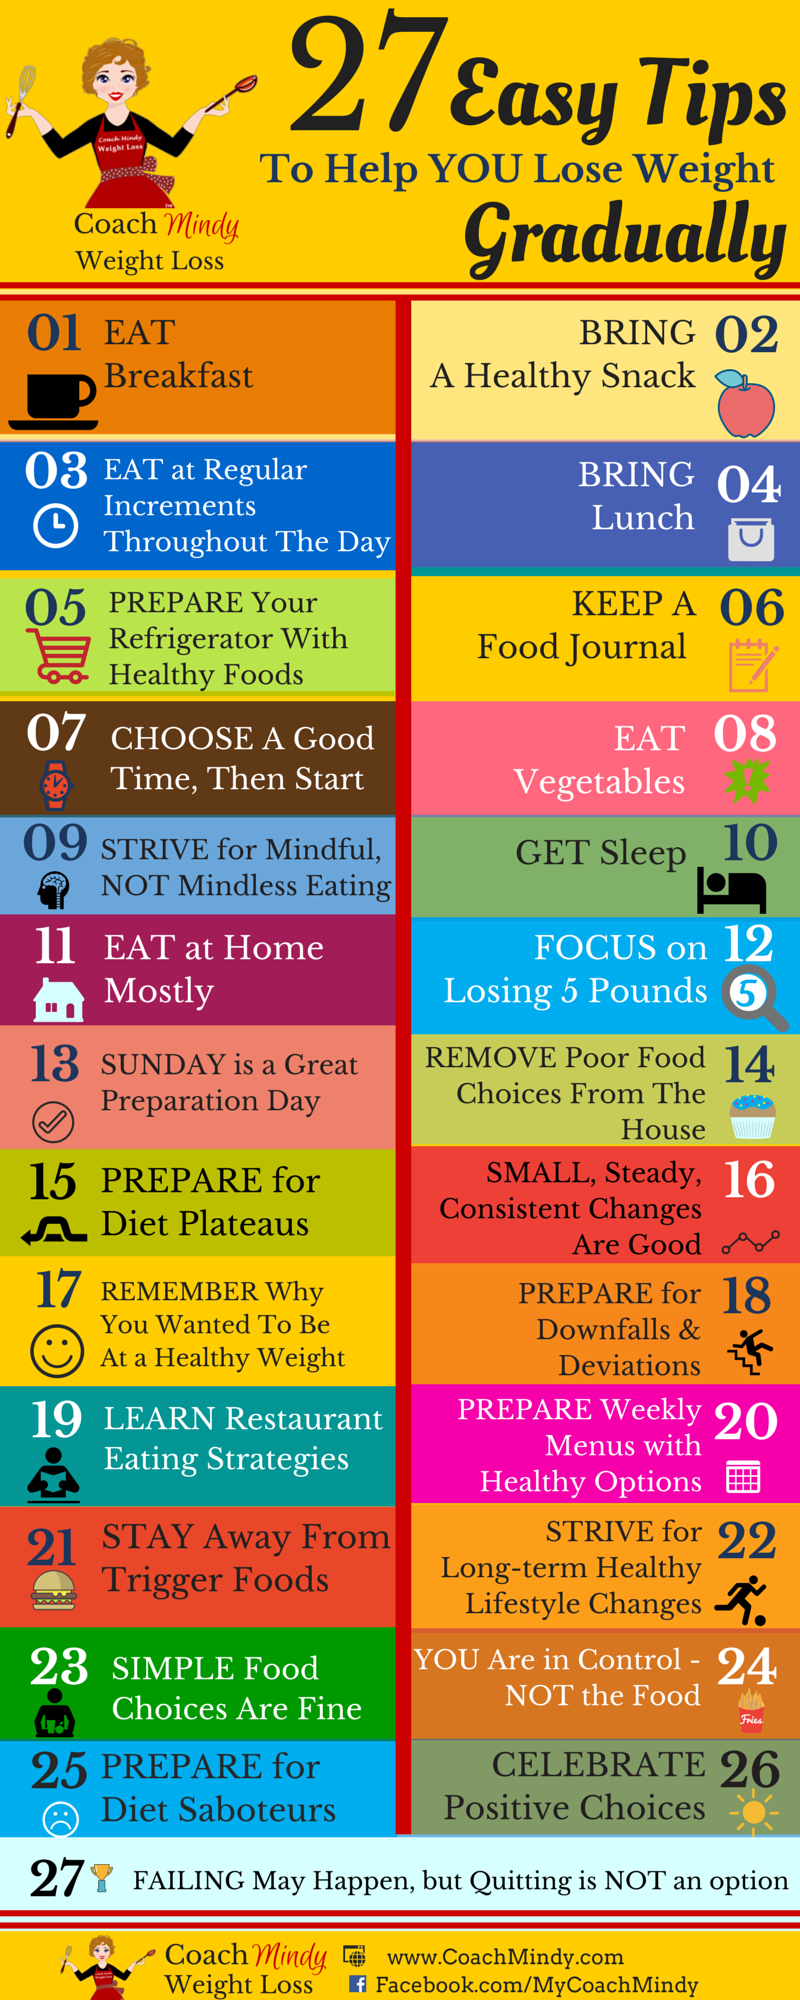 weight loss methods at home